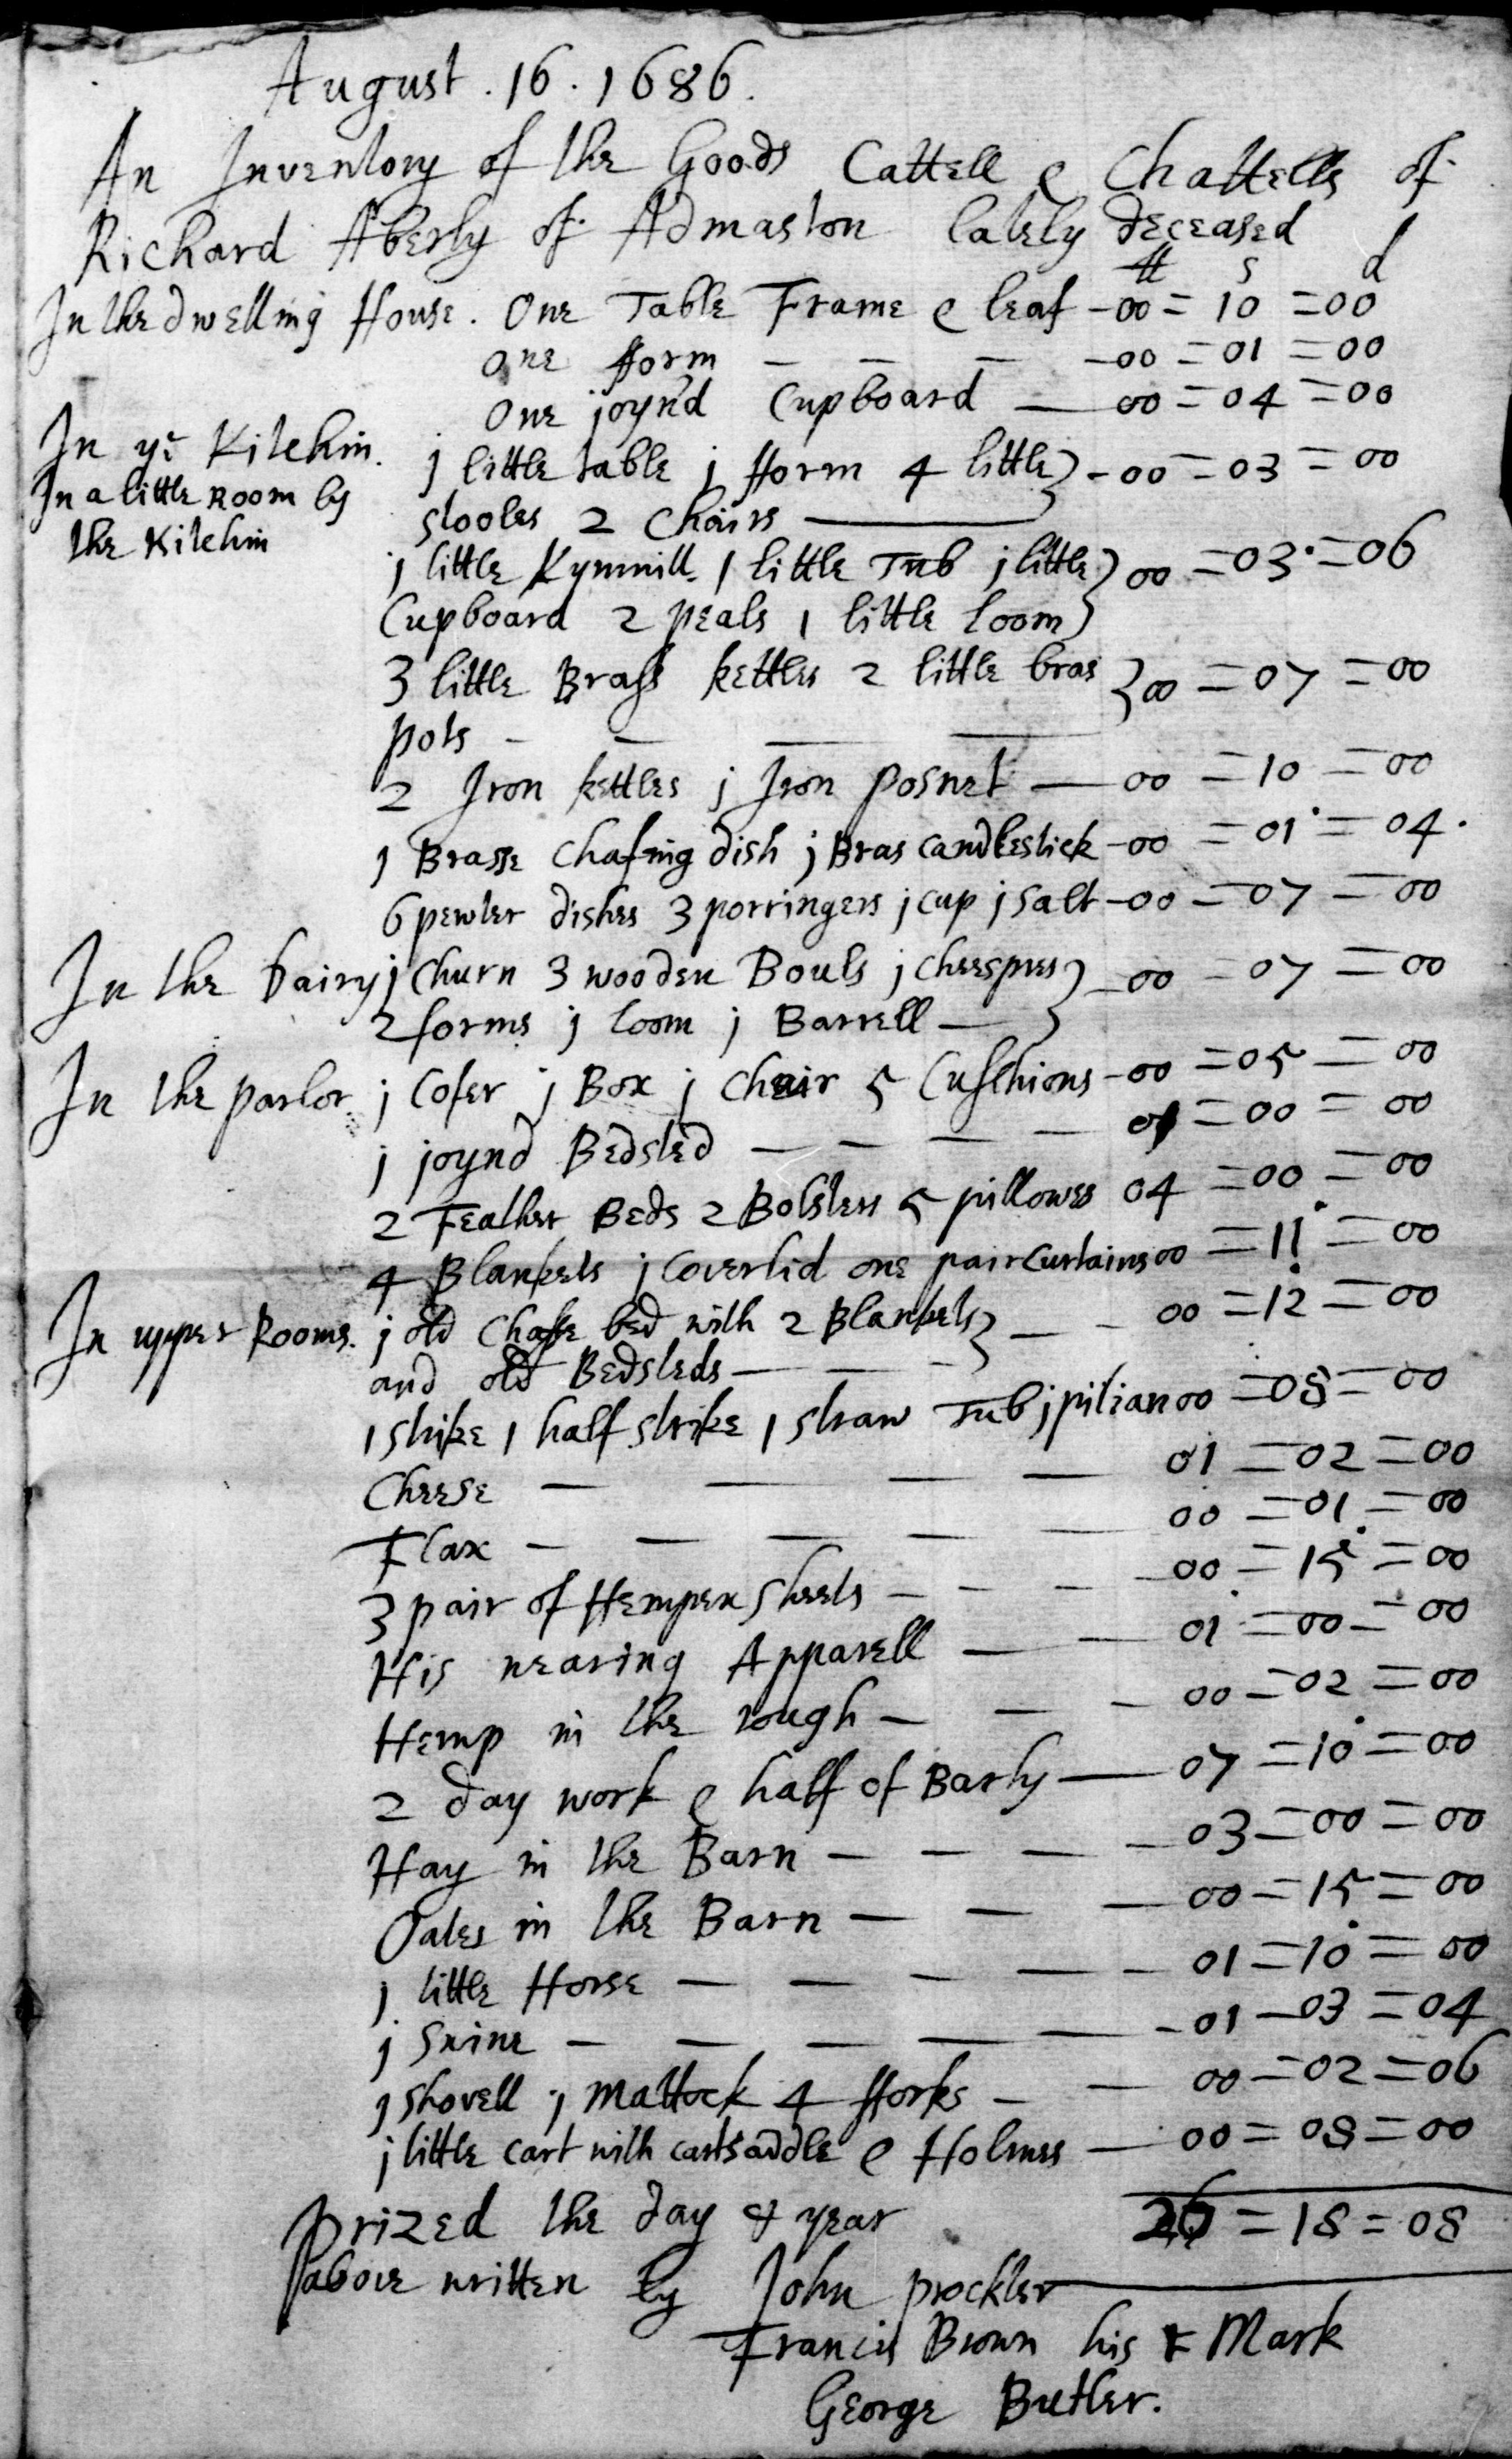 The 1686 inventory of Richard Aberley (Richard's father?)